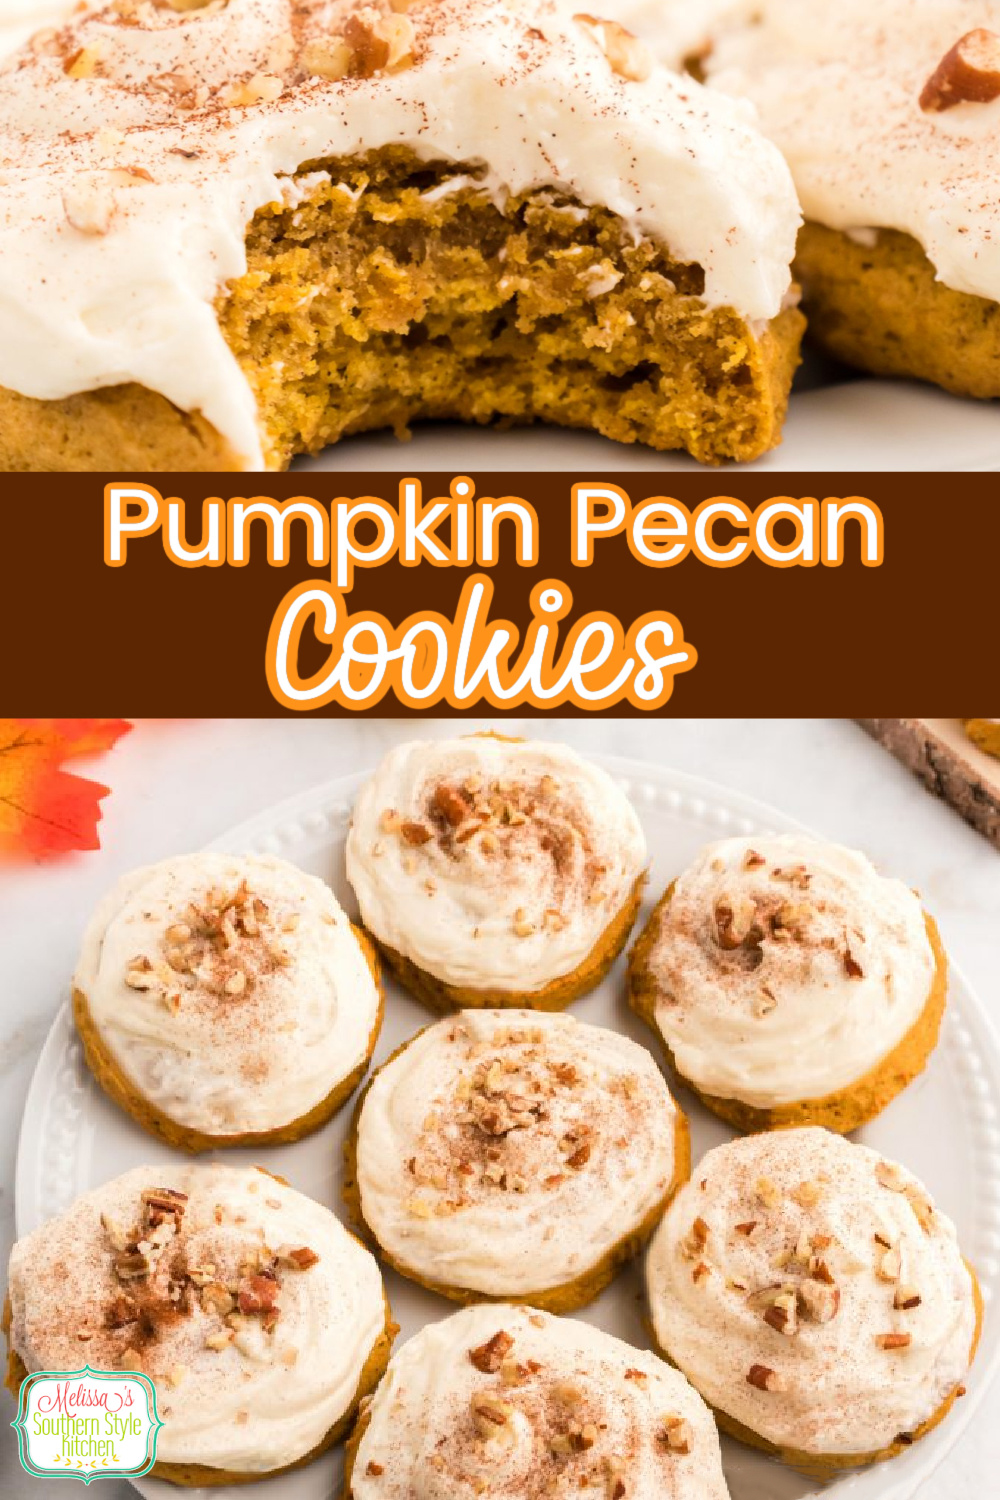 The cream cheese frosted Pumpkin Pecan Cookies encompass the fall favors we love in an insanely delicious handheld dessert #pumpkincookies #pumpkinspice #creamcheesefrosting #fallbaking #thanksgivingdesserts #pumpkinpecancookies